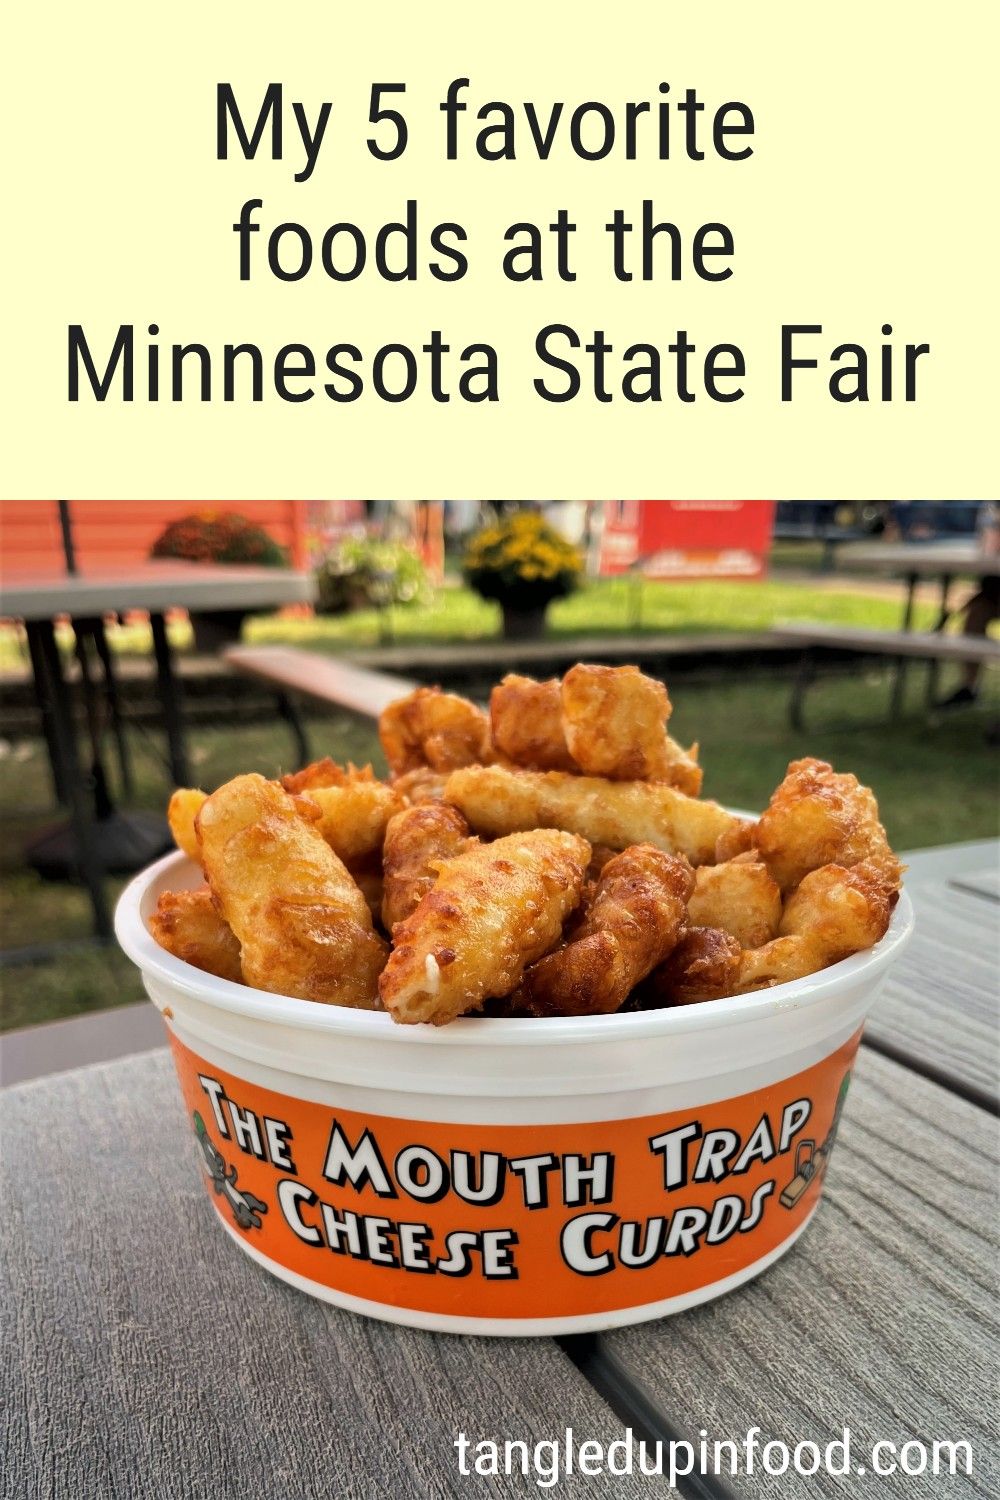 Photo of a plastic bucket of cheese curds and text reading "My 5 favorite foods at the Minnesota State Fair"